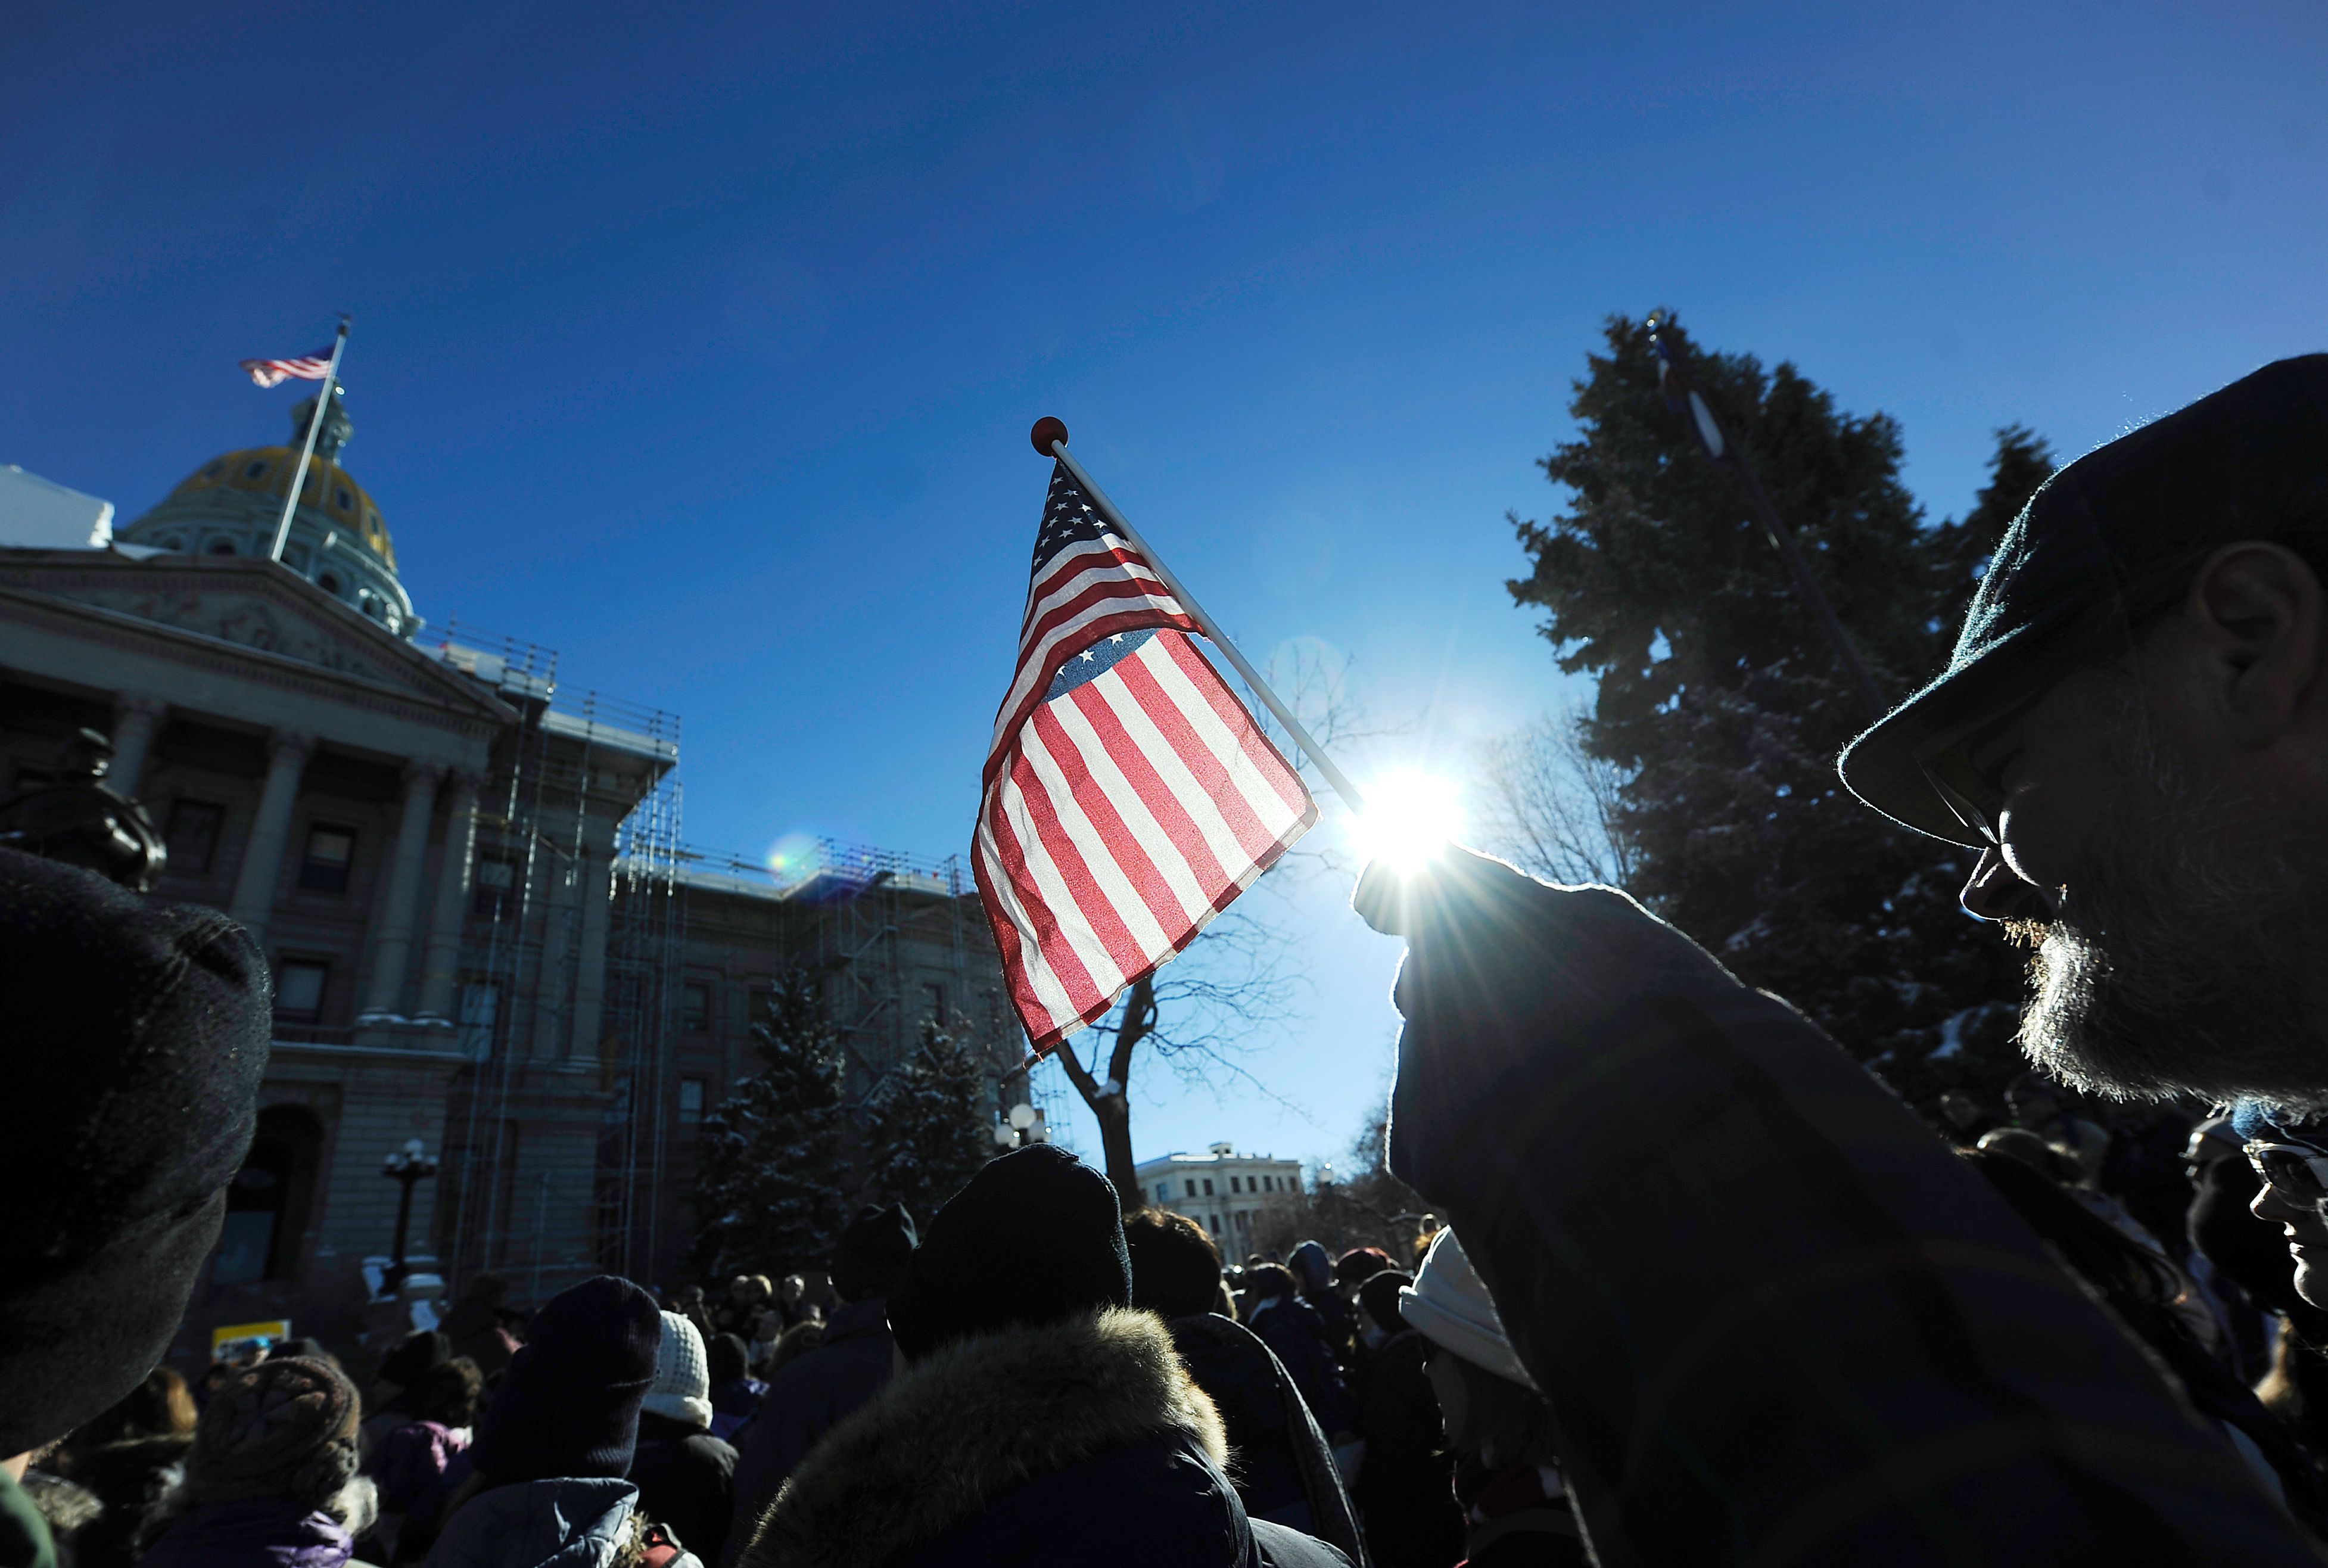 A demonstrator holds a flag during a protest outside the Colorado Capitol building in Denver, Colorado on December 19, 2016 to demonstrate against U.S. President-elect Donald Trump on the day the Electoral College votes to certify the election. (Chris Schneider—AFP/Getty Images)